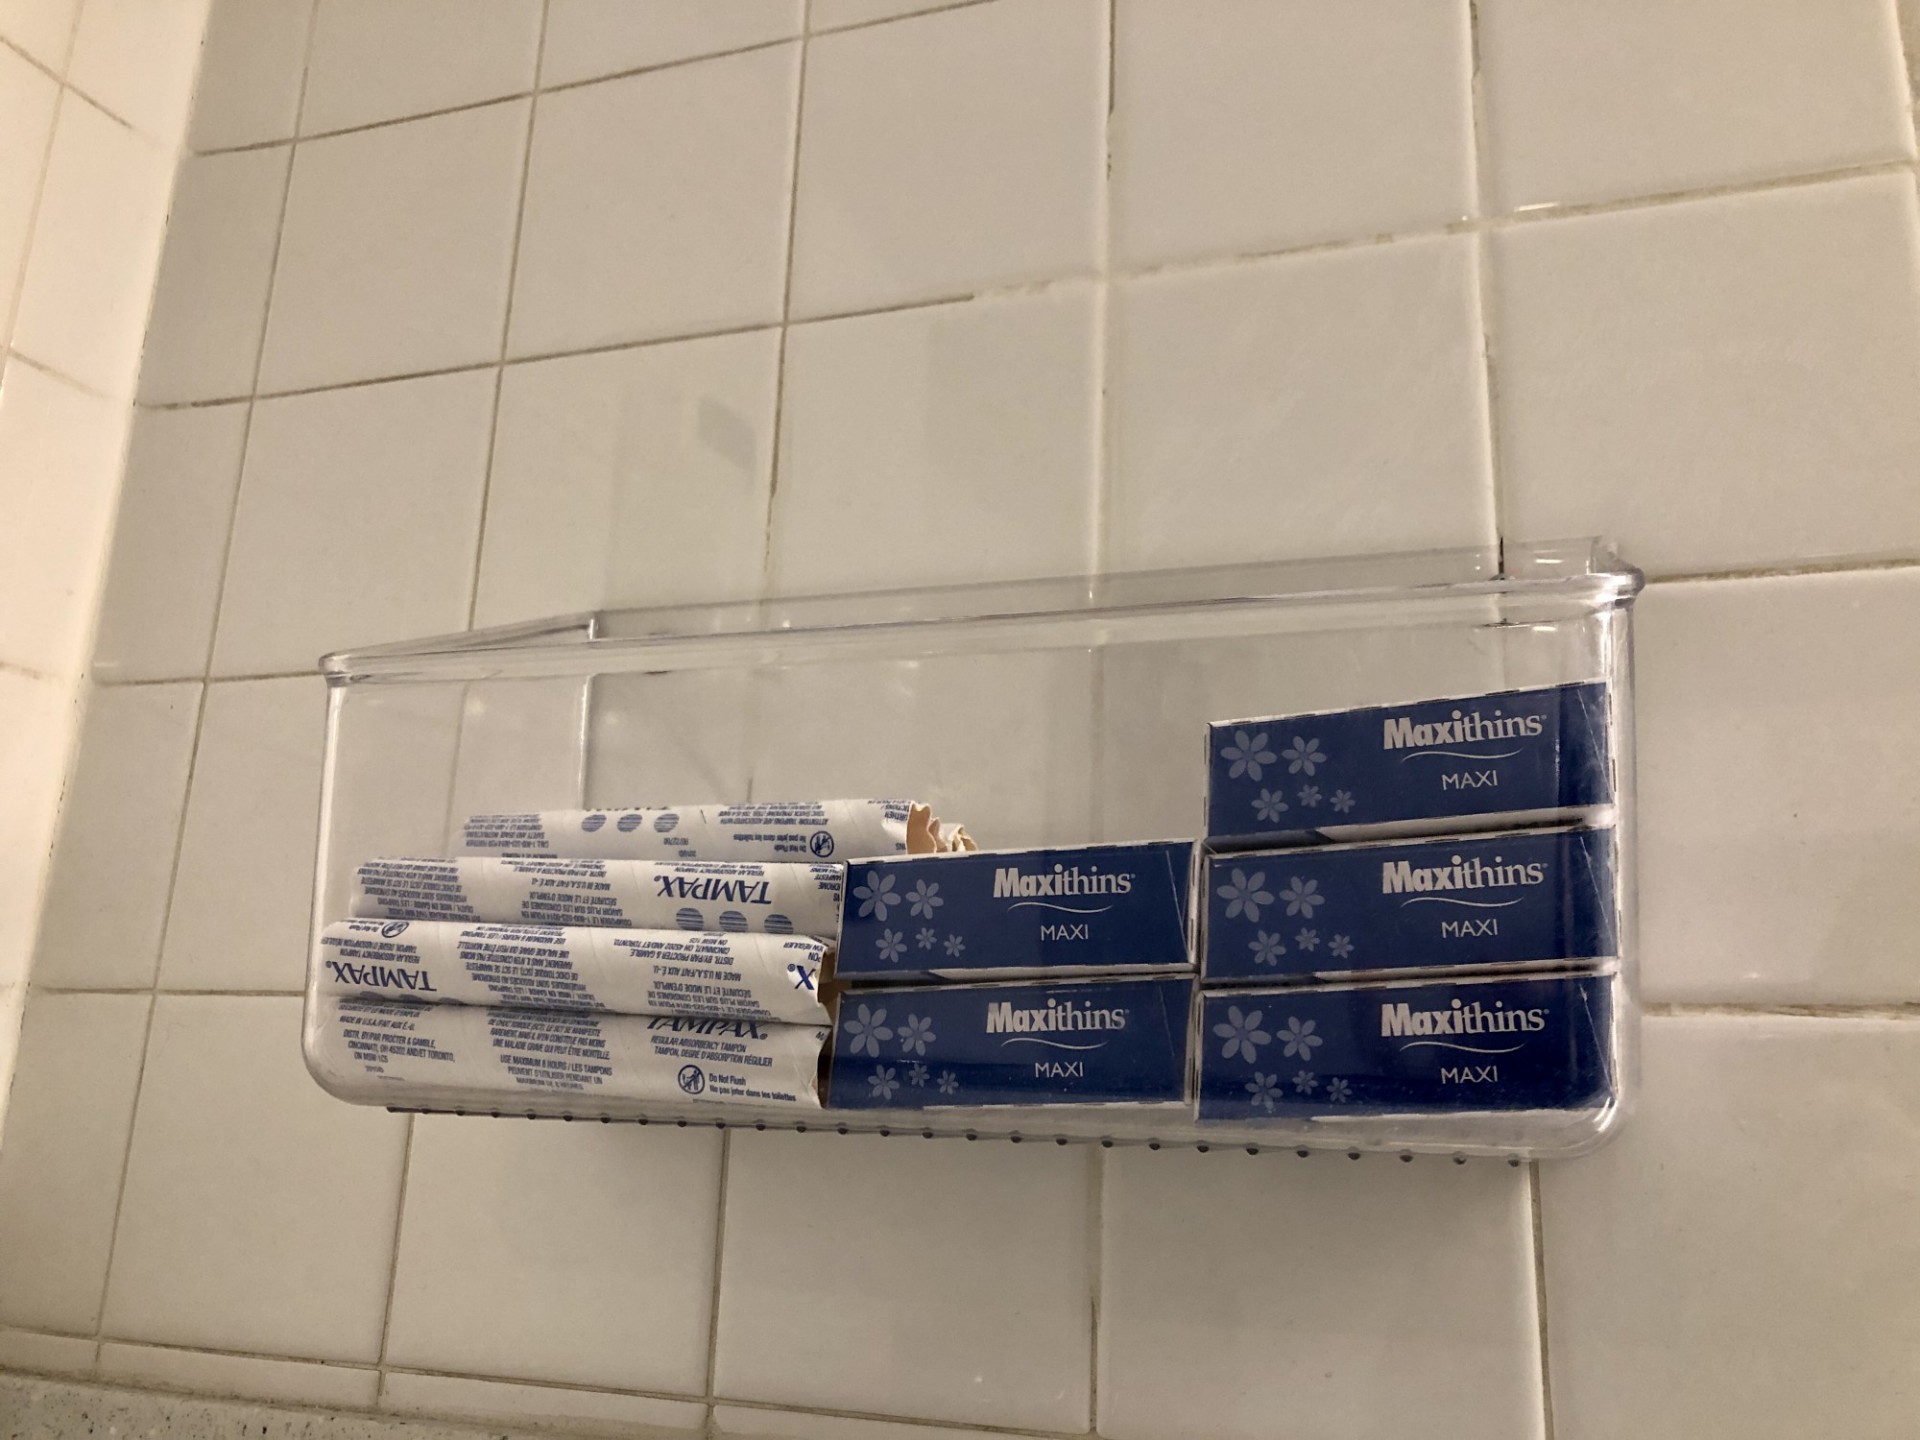 A plastic container on the wall of a restroom that has free tampons and menstraul pads.